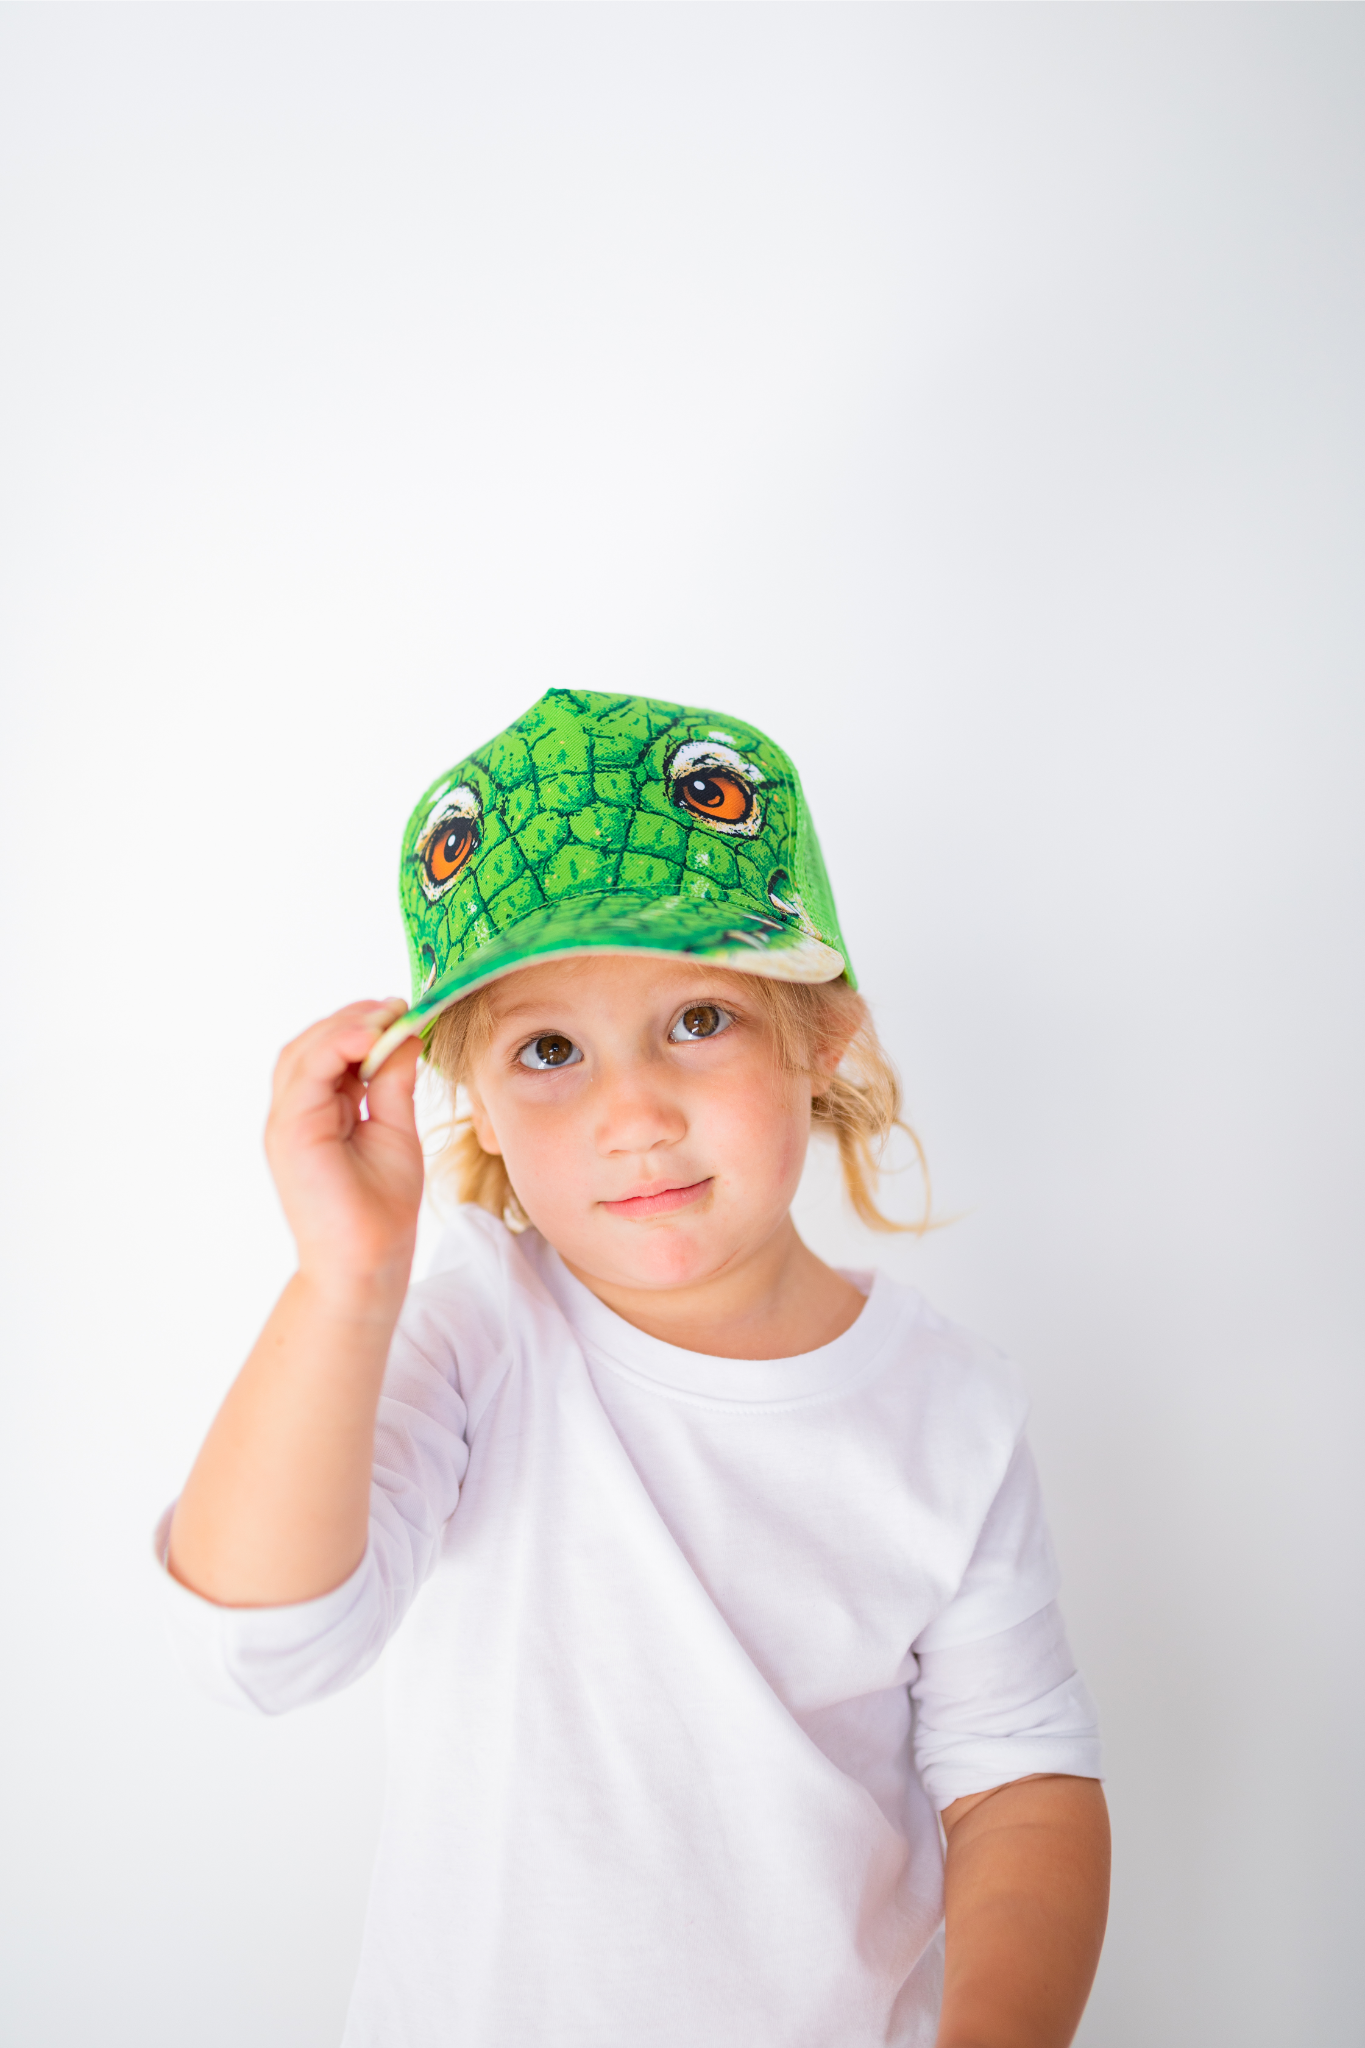 Image of little girl model wearing Gator cap and holding with one hand (front view white background)